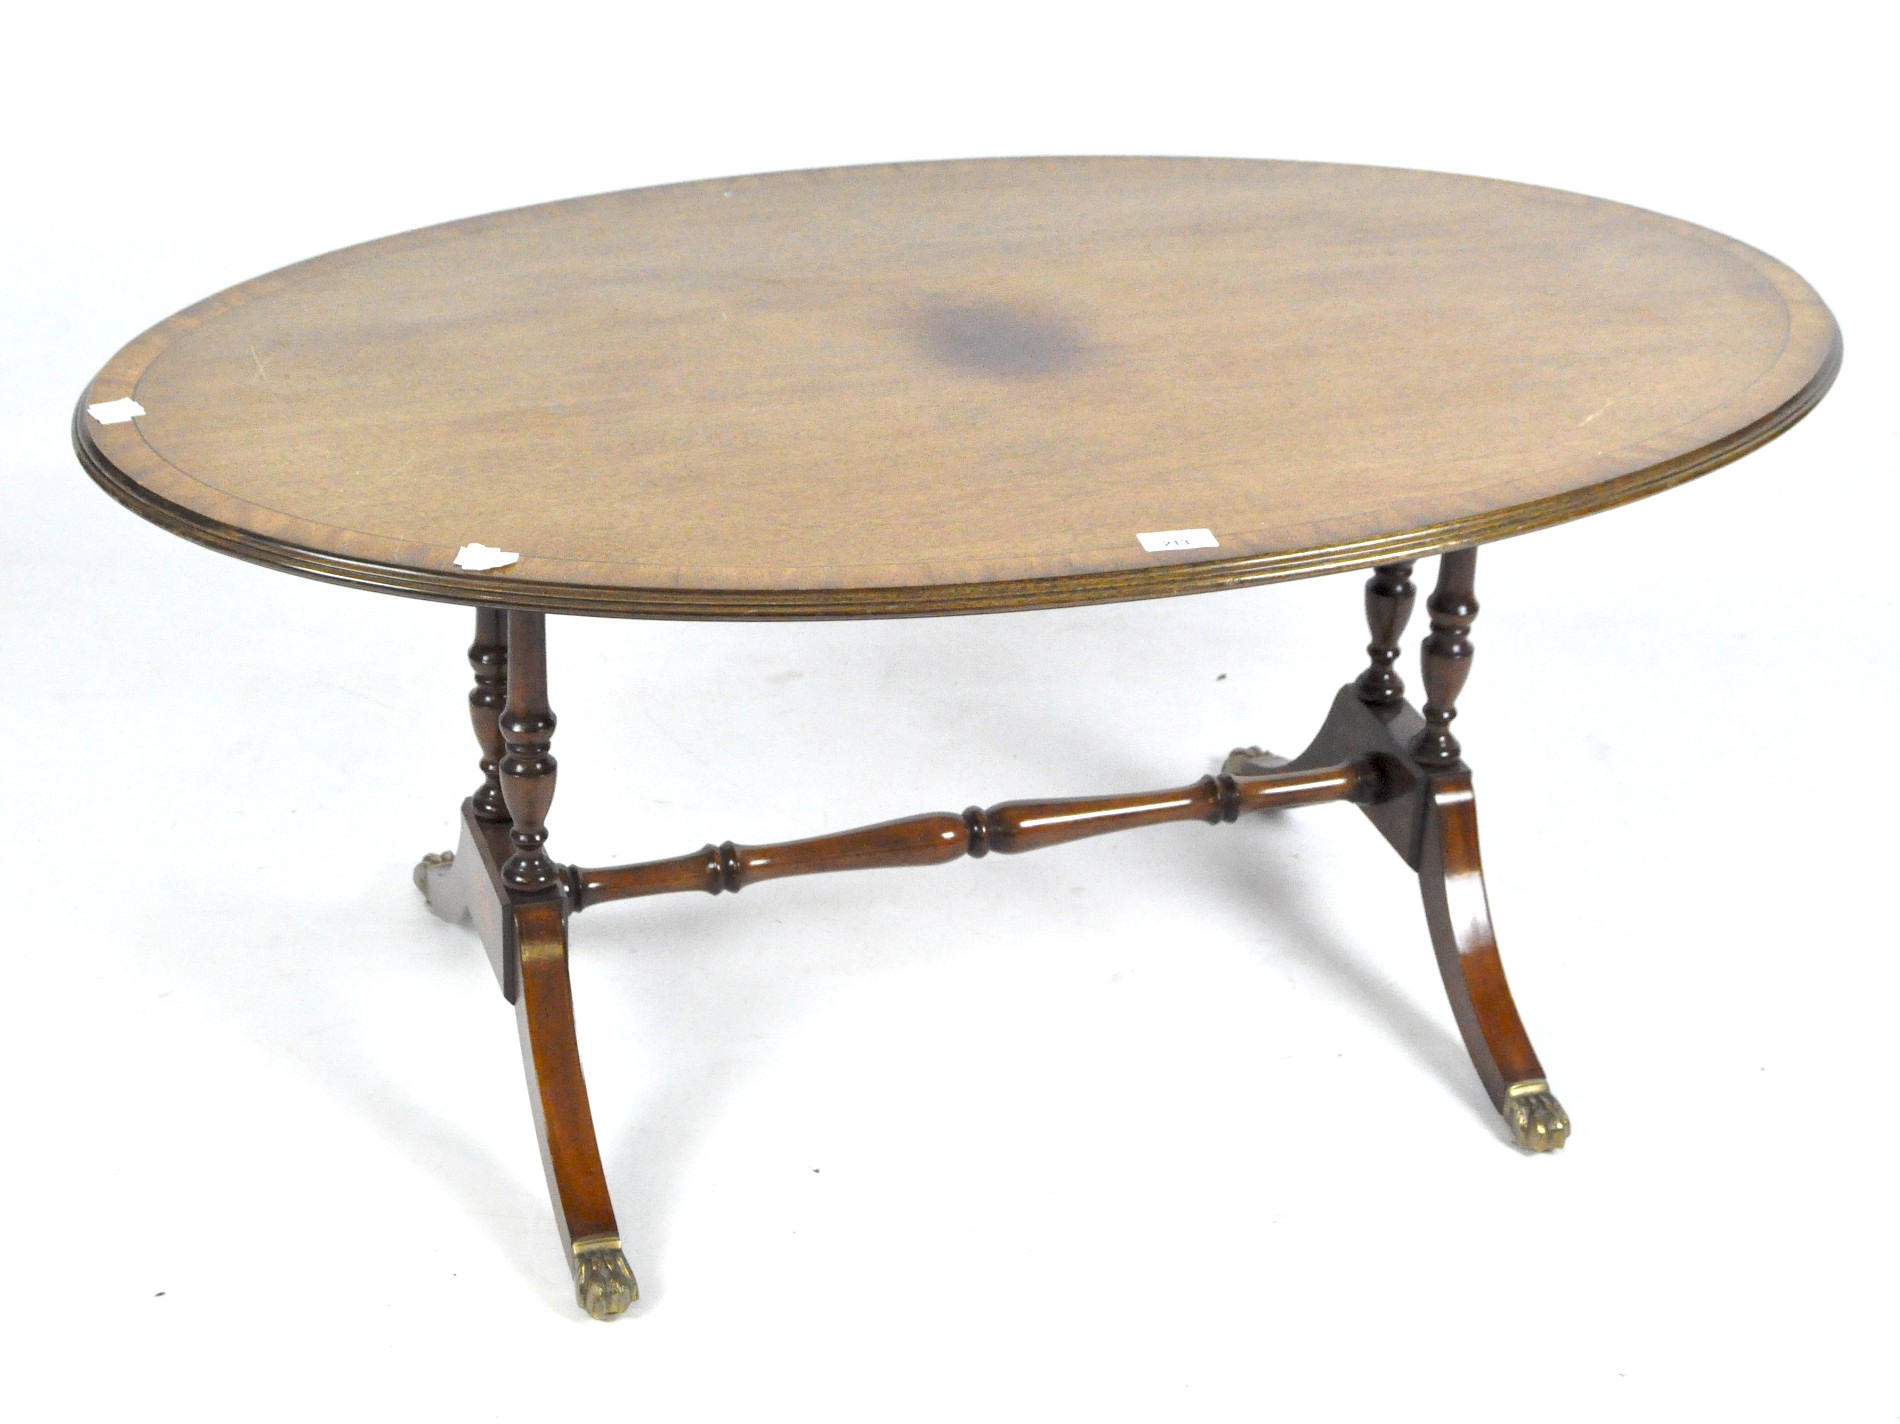 A mahogany Georgian style oval coffee table with inlaid details,